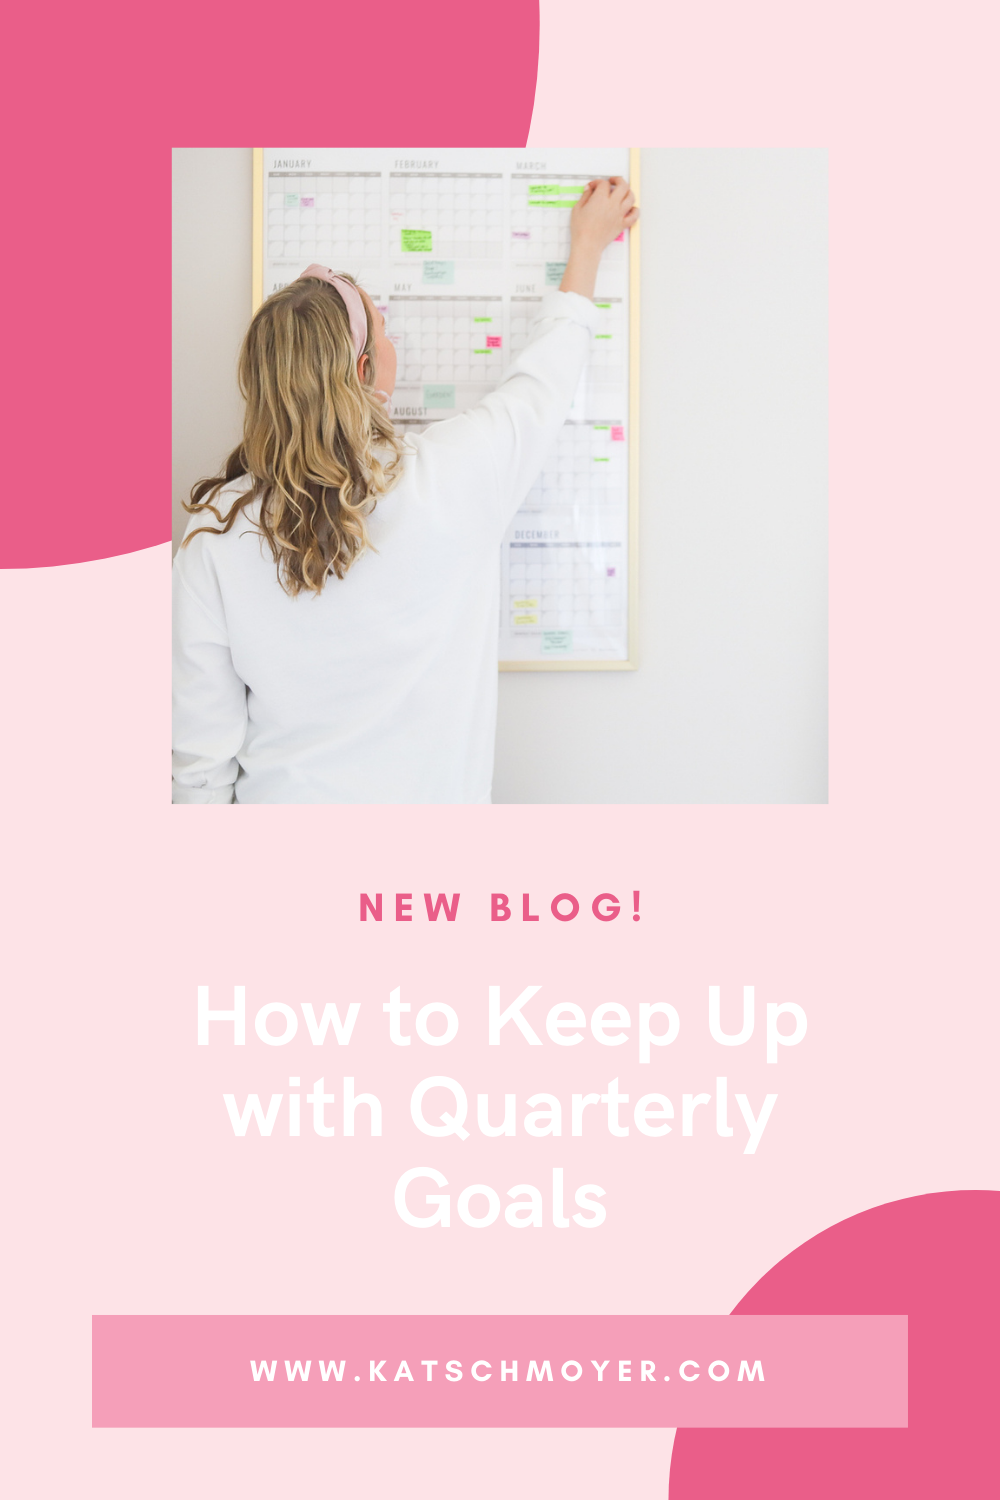 Tips to keep up with quarterly goals so you actually achieve them